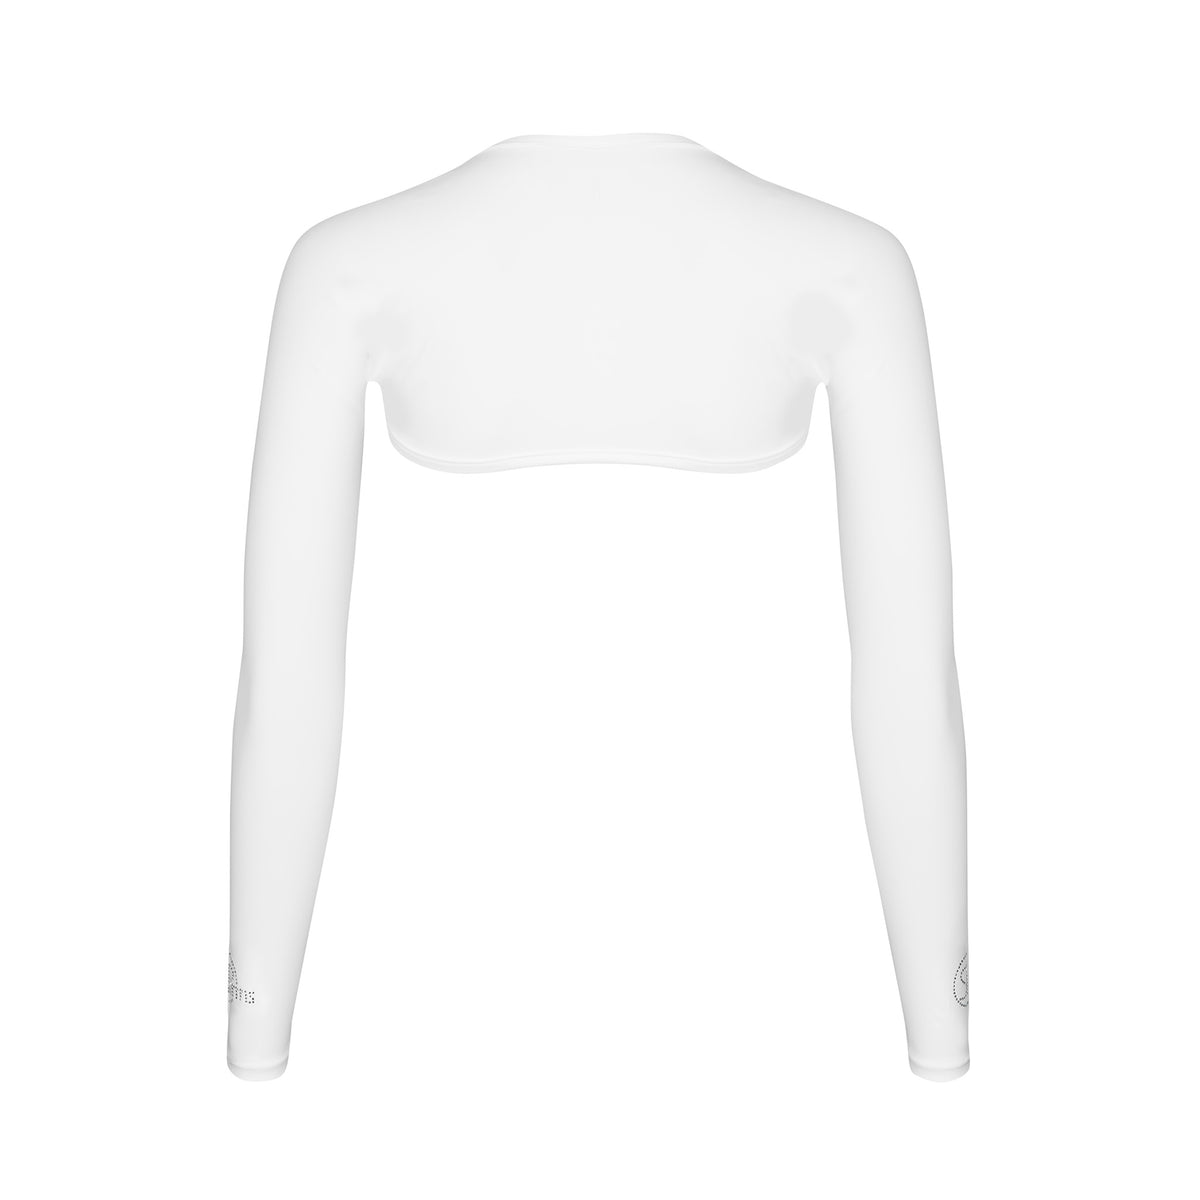 SP Arms - Shoulder Wrap (UV sleeves) - Crystal logo [White] - SParms